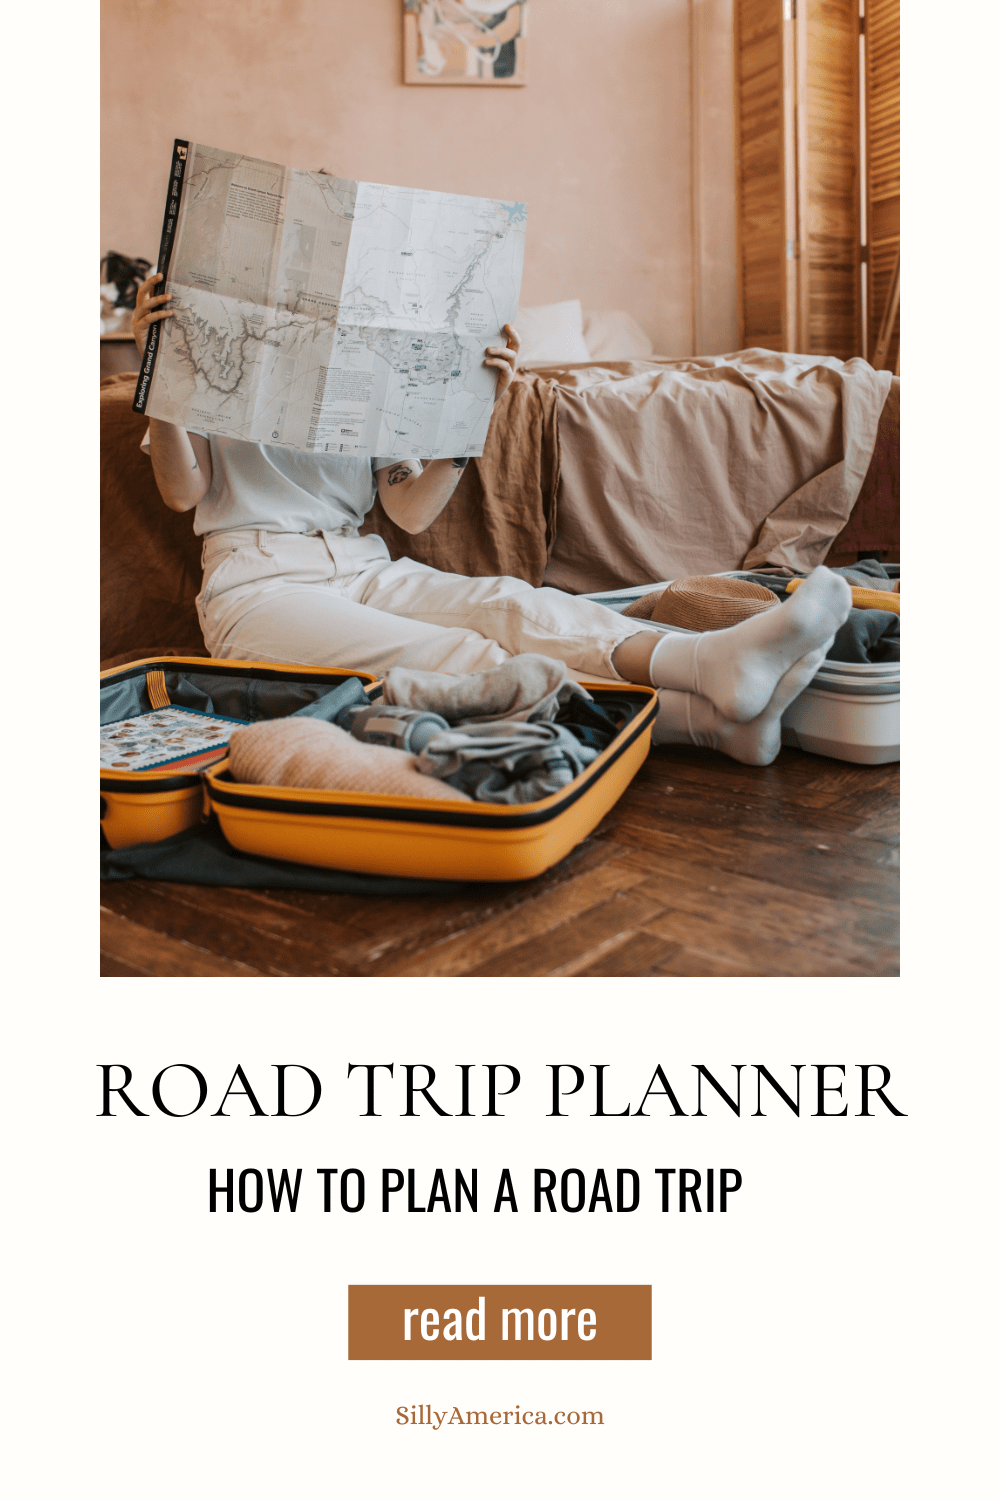 Planning a road trip can be fun, but daunting. You're going to want a plan. This road trip planner walks you through all of the things you need to think about before and during your trip to have the best time possible. You'll find information on how to plan a road trip with multiple stops, what to pack, and everything to see and do! Use our best road trip planner guides and road trip planning tools to make sure you get to your destination and back with no bumps in the road! #RoadTripPlanner